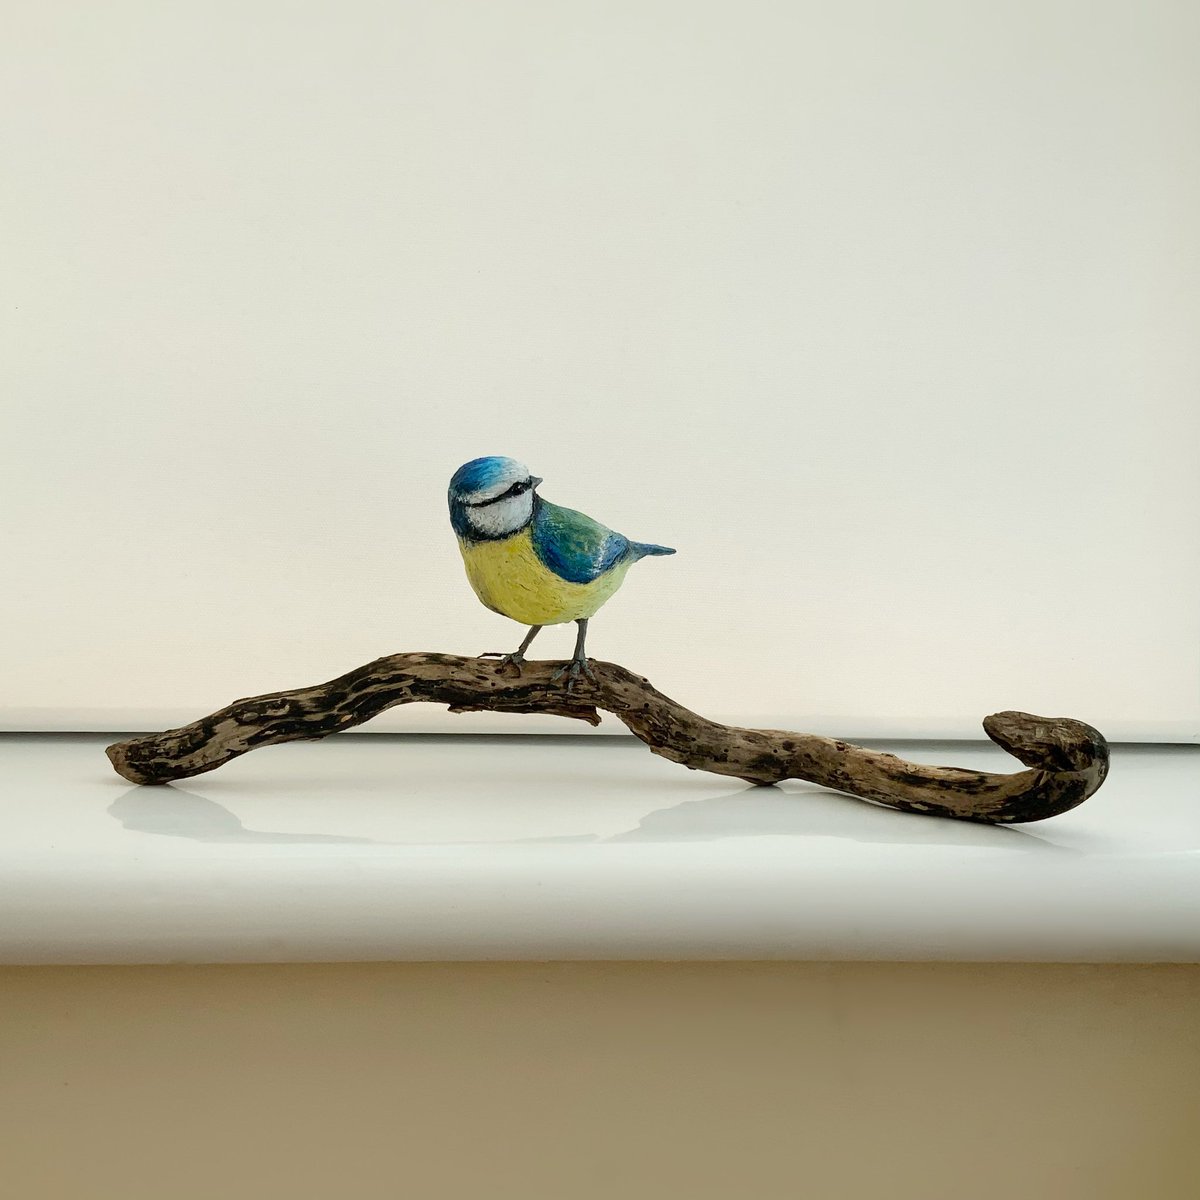 I painted him 😊 I think he’ll be sitting in amongst my paintings at Sir Hillier Gardens. June 15-28th #bluetit #britishbirds #birdsofinstagram #birdlover #sculptures #paintings #artexhibition @hilliergardens #artgallery